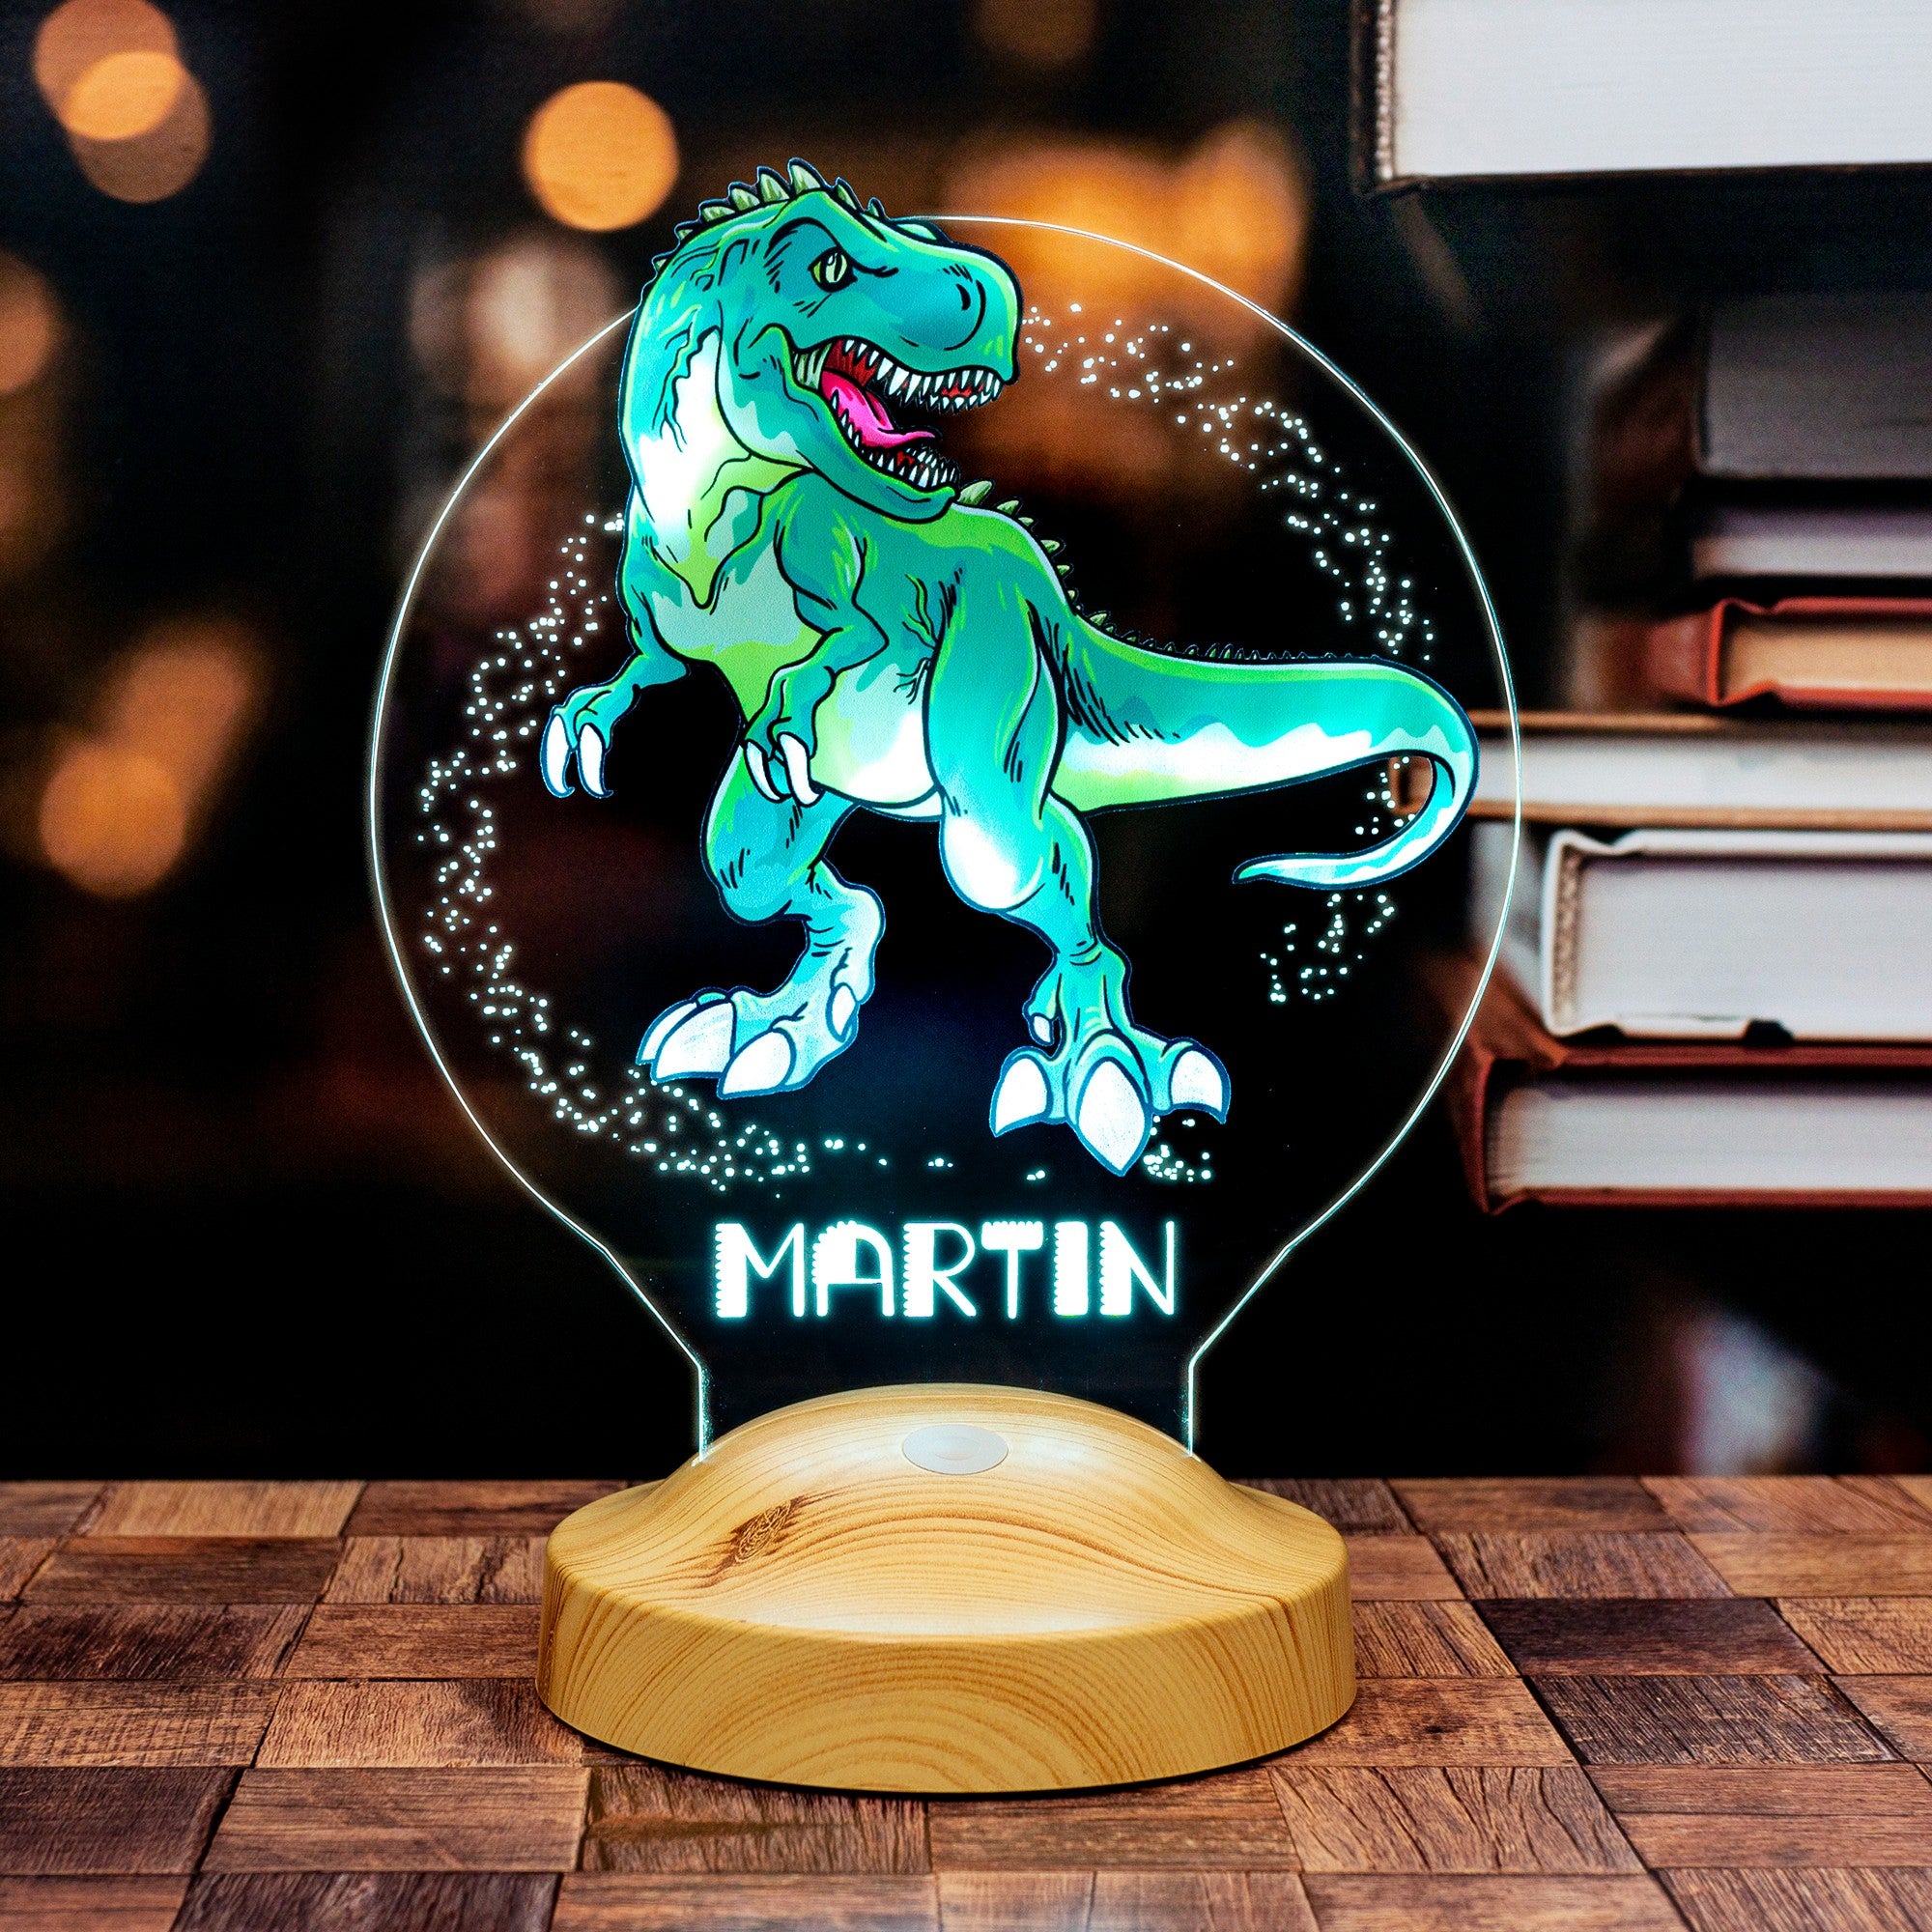 T-REX DINOSAUR PERSONALIZED LAMP WITH UV PRINTING 3D VISION LED NIGHT LIGHT